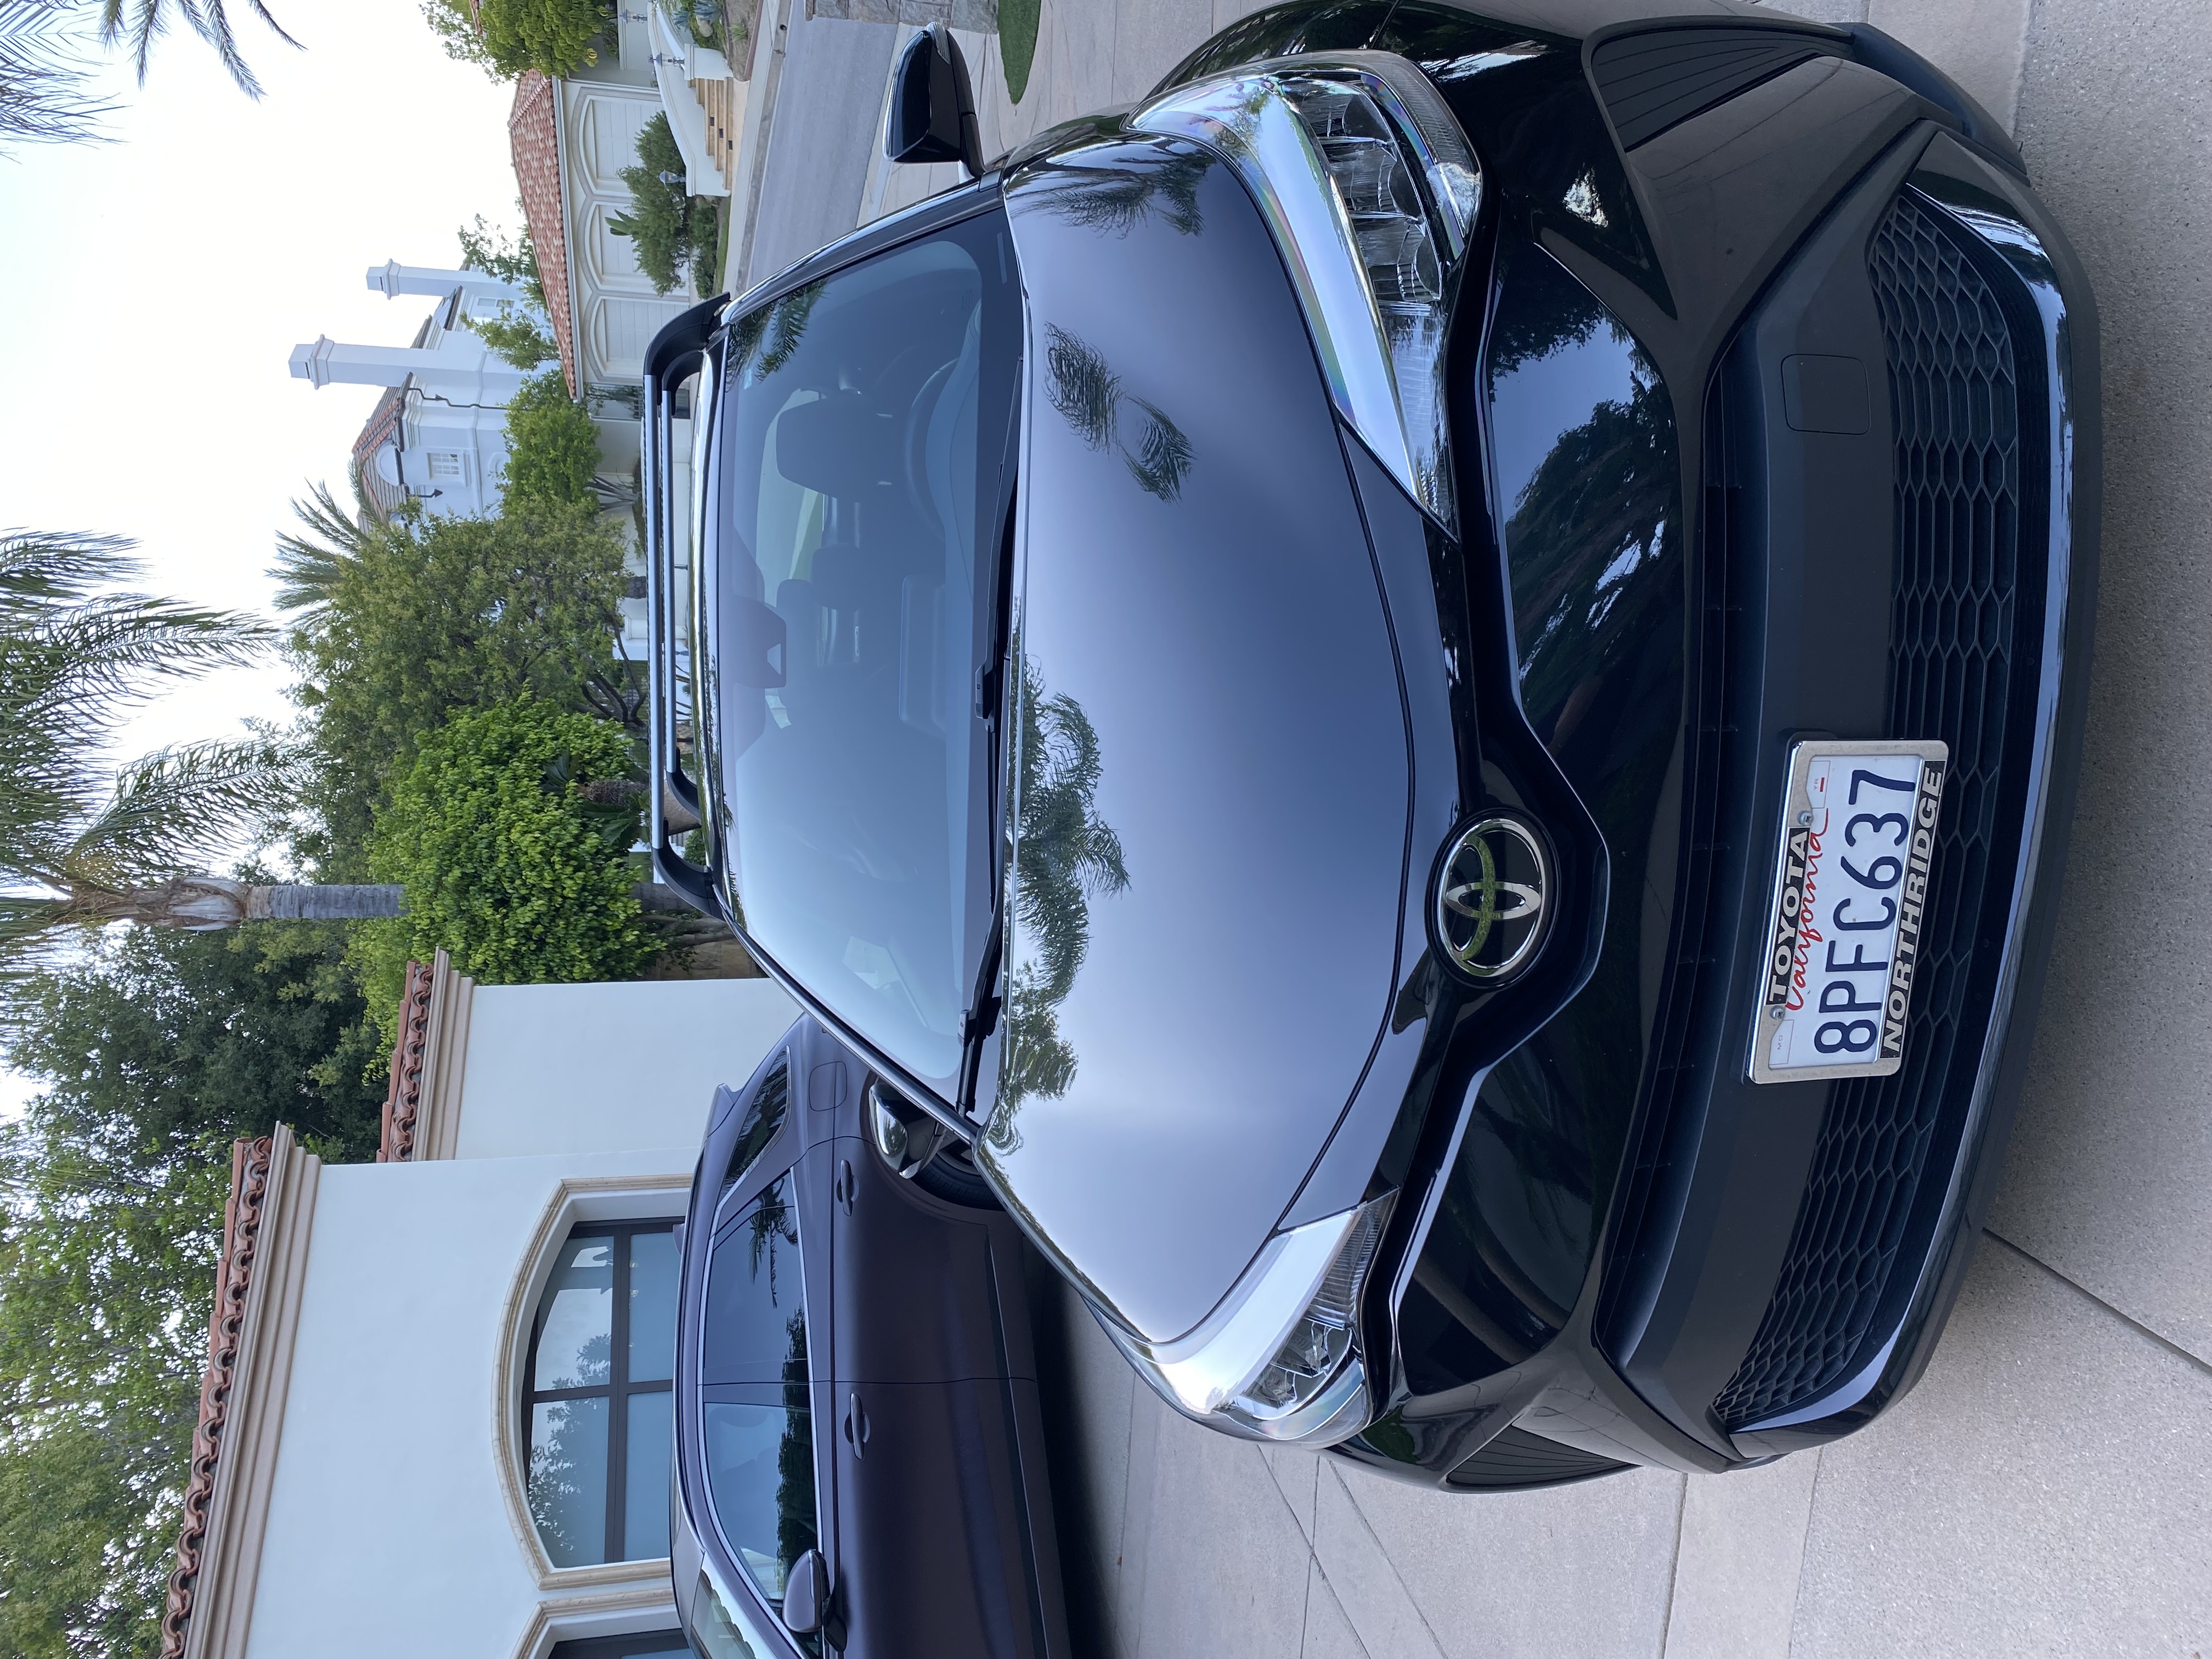 Used Toyota C-HR for Sale Right Now - Autotrader